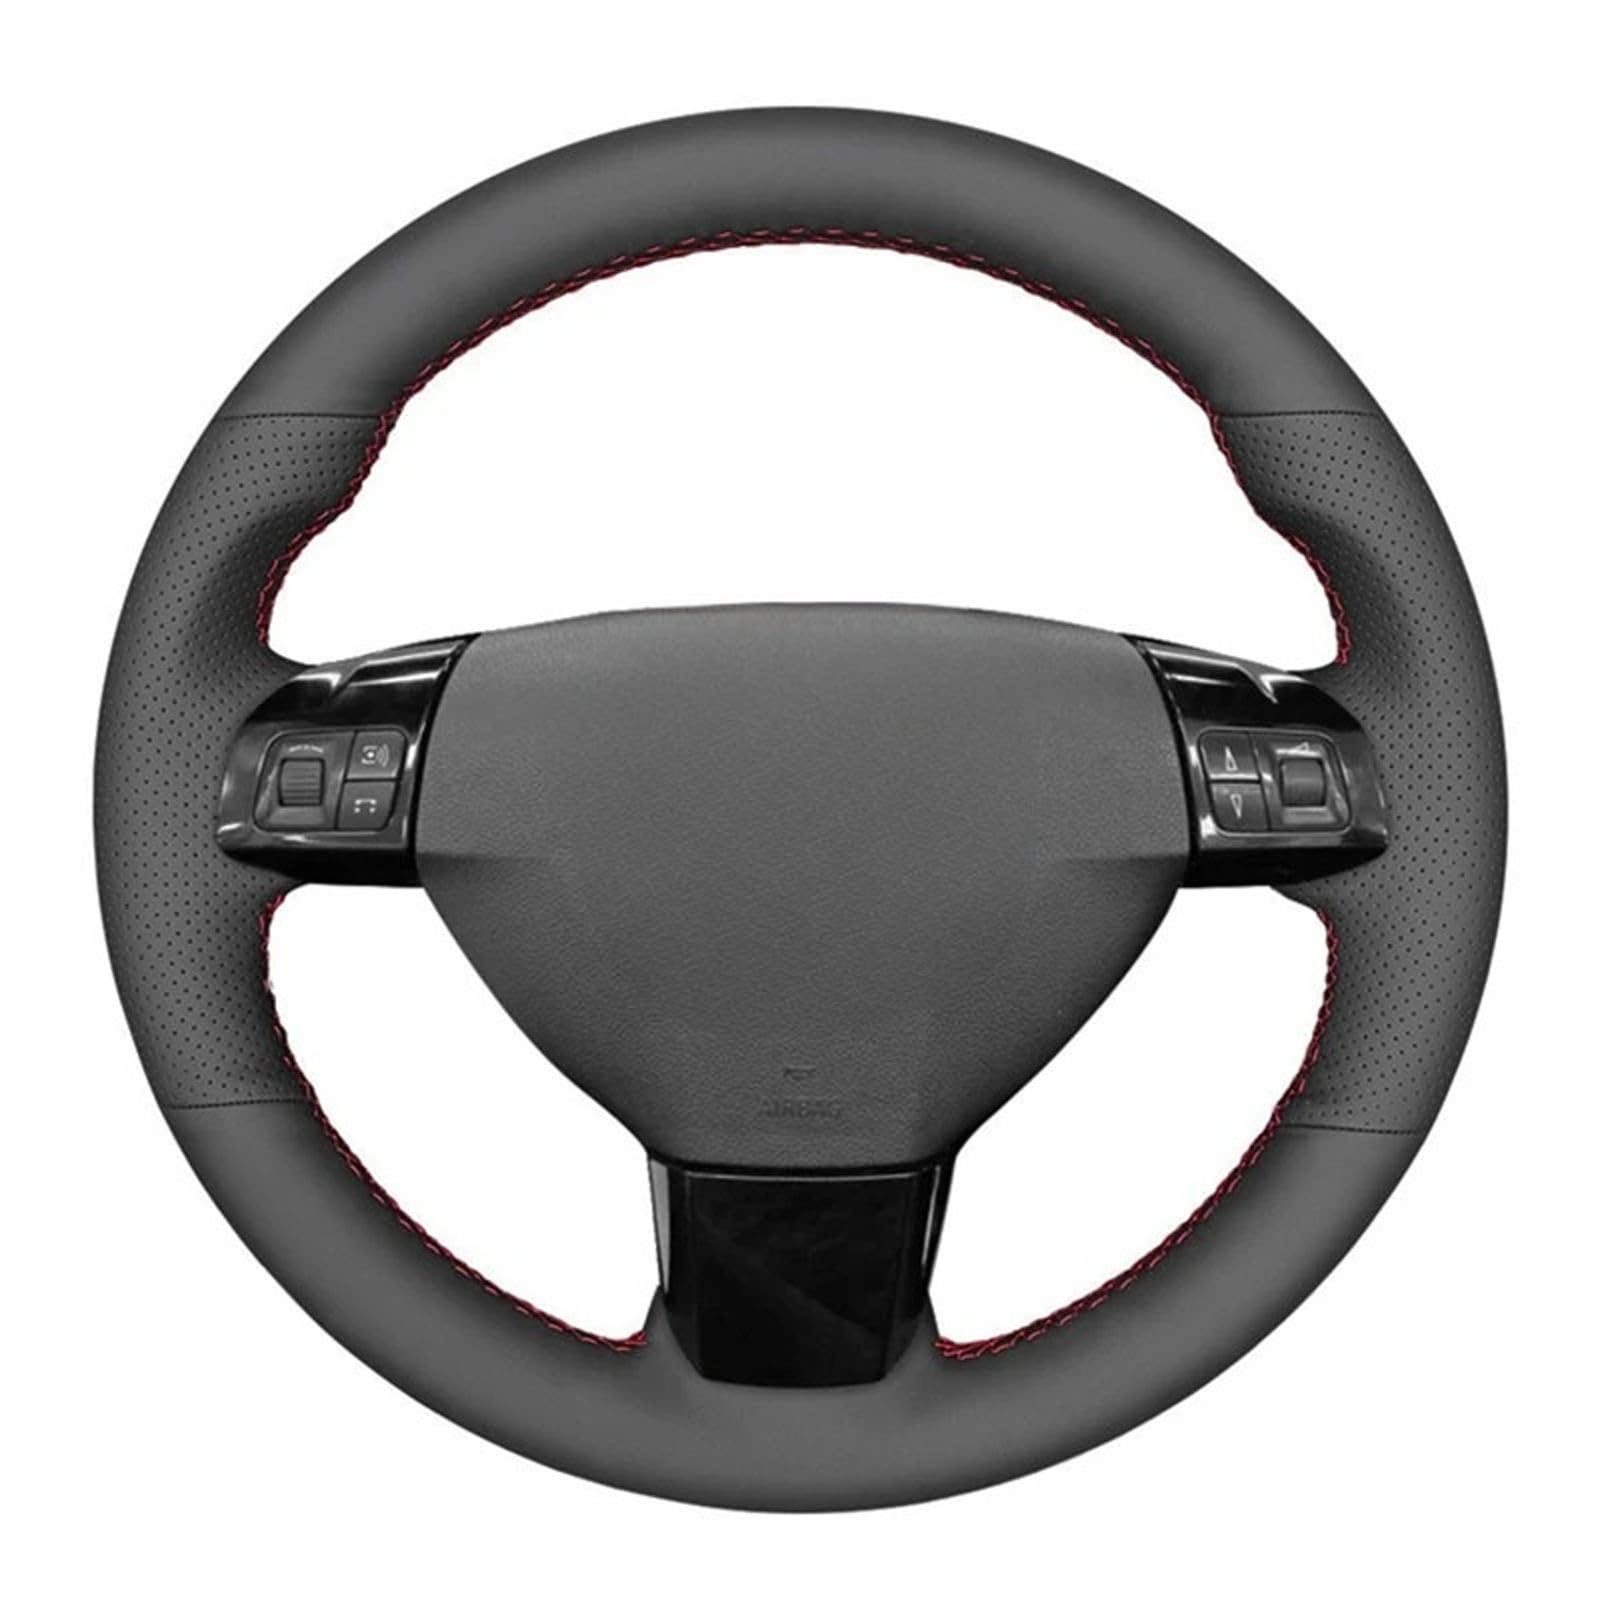 TQABADQ Black Artificial Leather Car Steering Wheel Covers,for Opel Astra (H) Zafira (B) Signum Vectra (C) Vauxhall Astra Holden Astra von TQABADQ